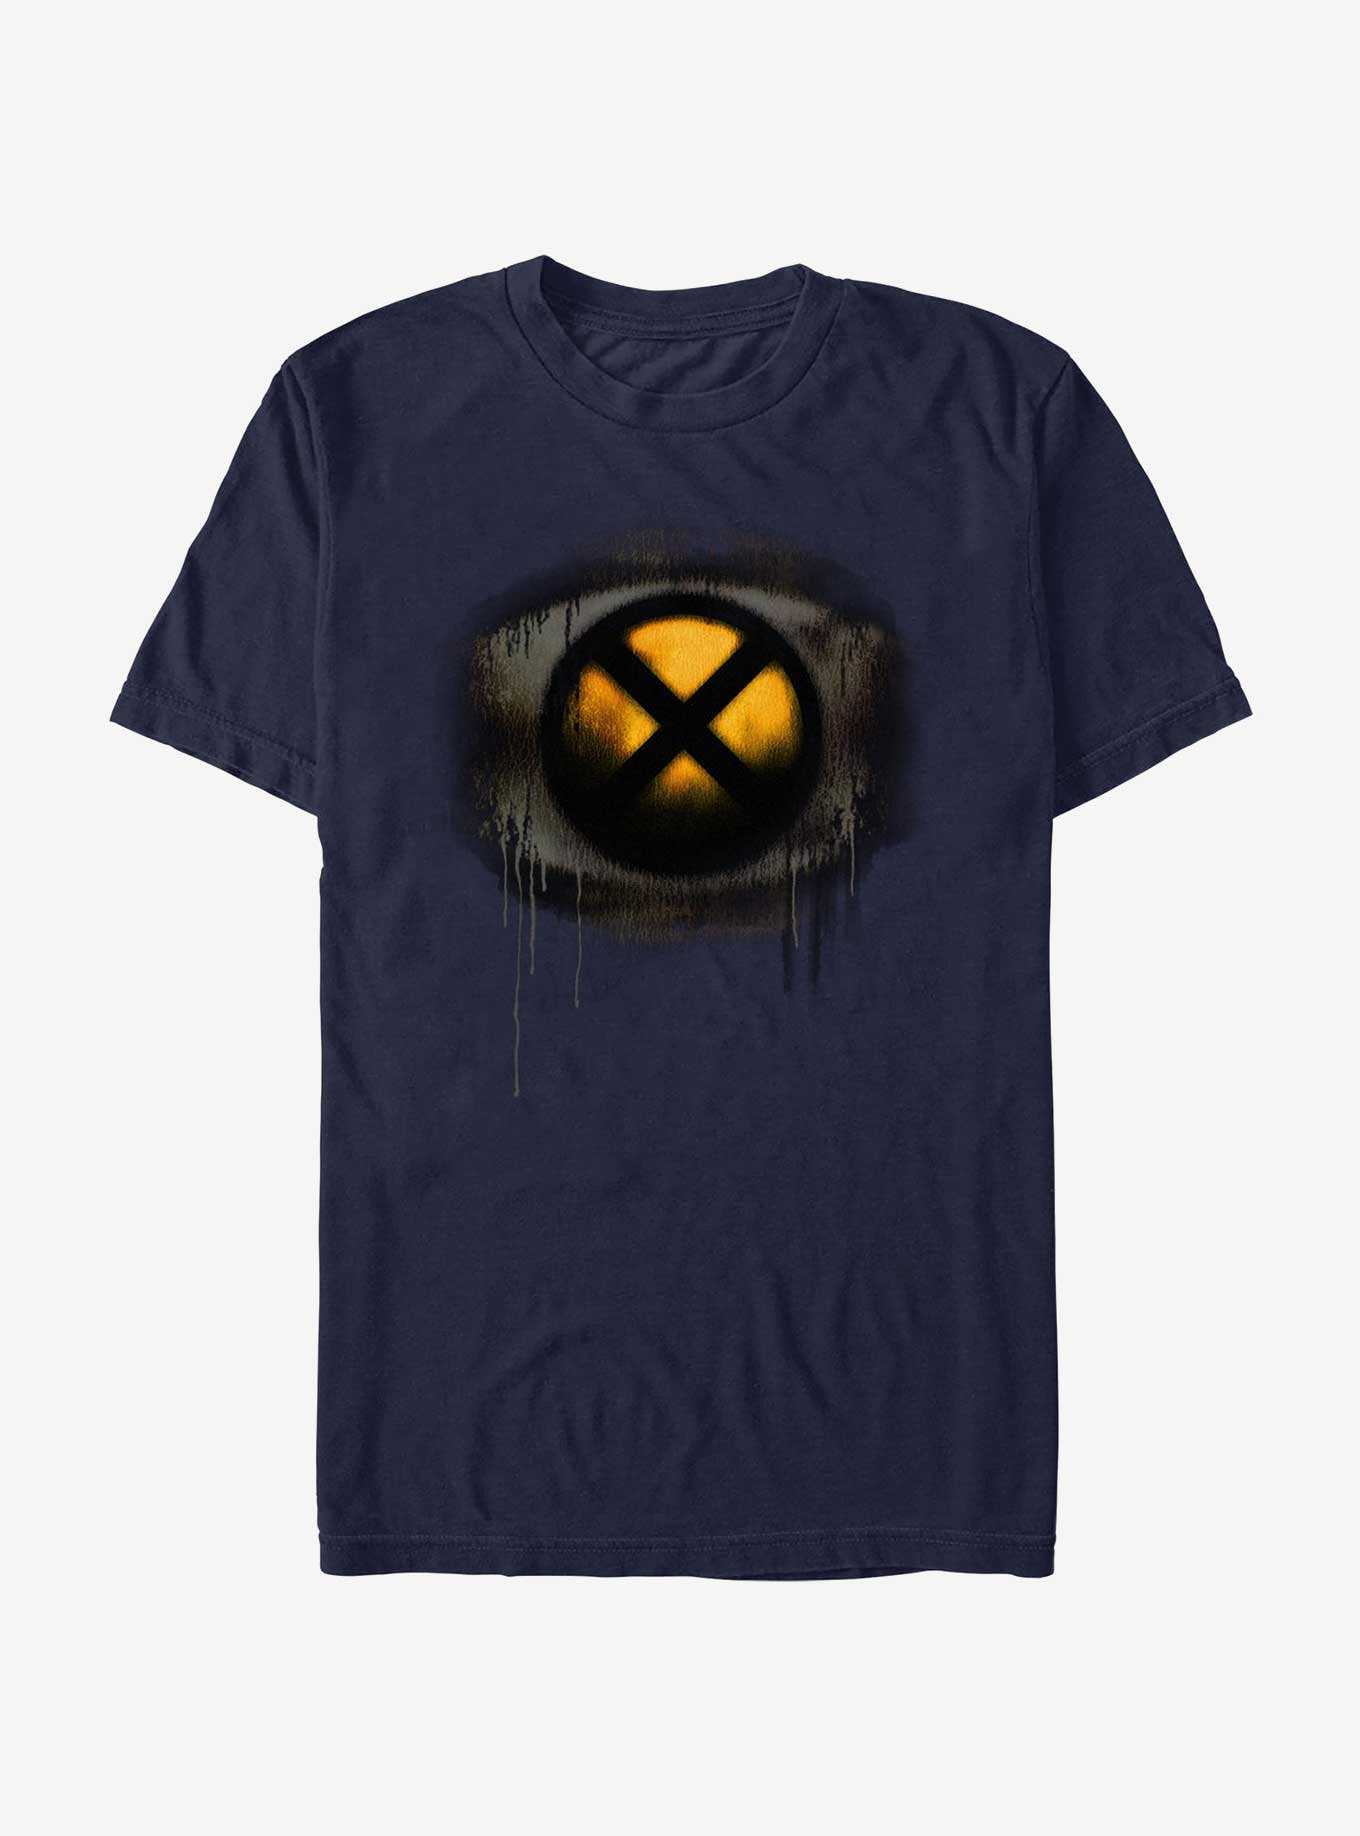 X-Men Rusted Icon T-Shirt, , hi-res